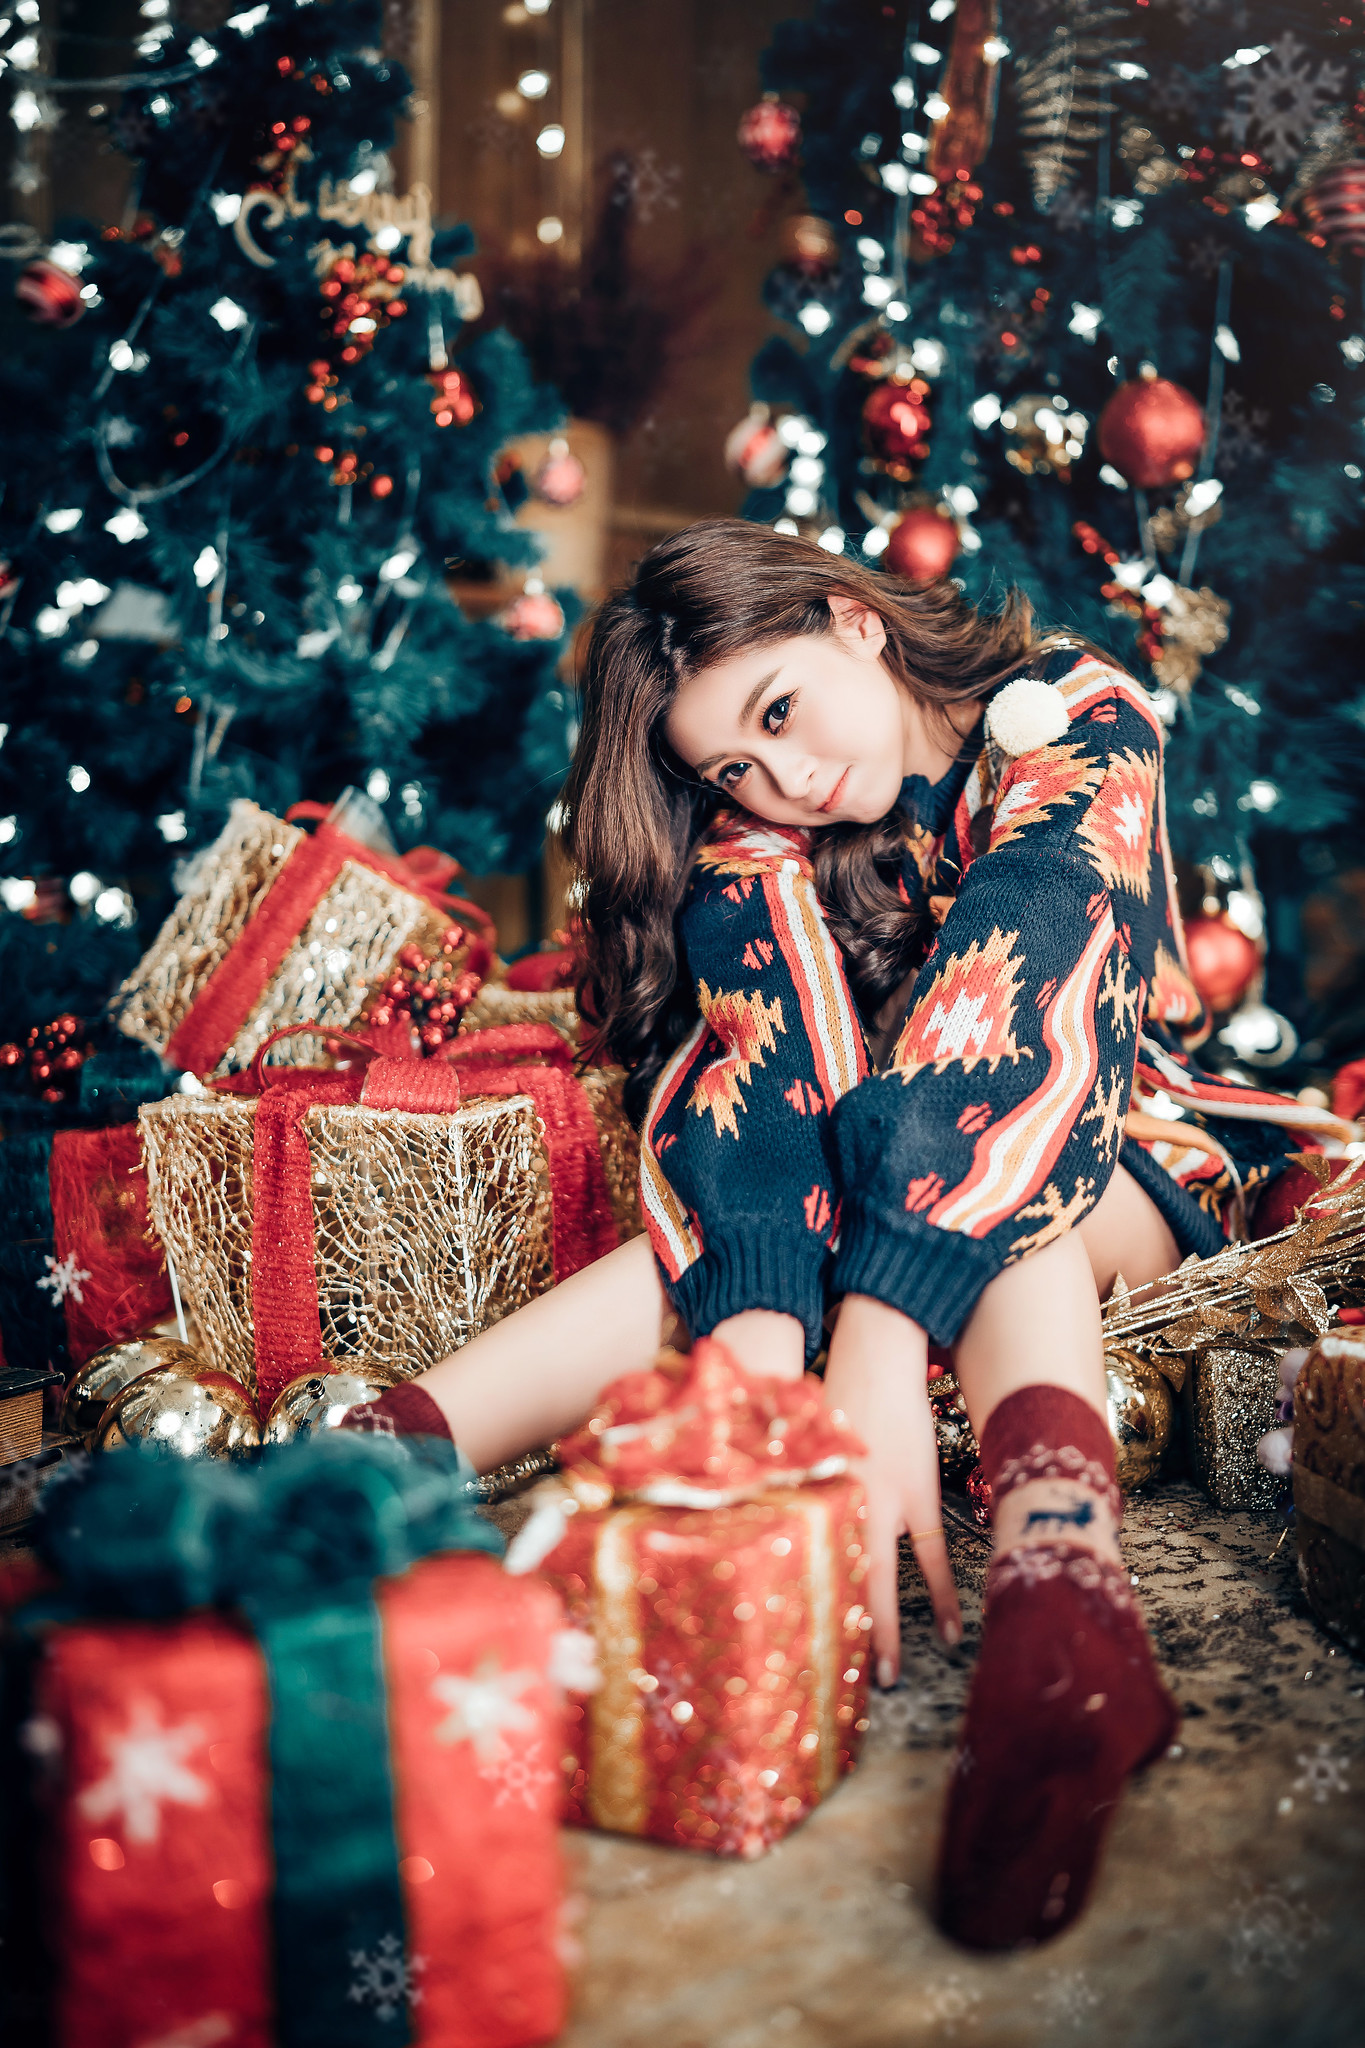 Christmas Christmas Ornaments Christmas Presents Asian Sitting Indoors Women Indoors Looking At View 1365x2048